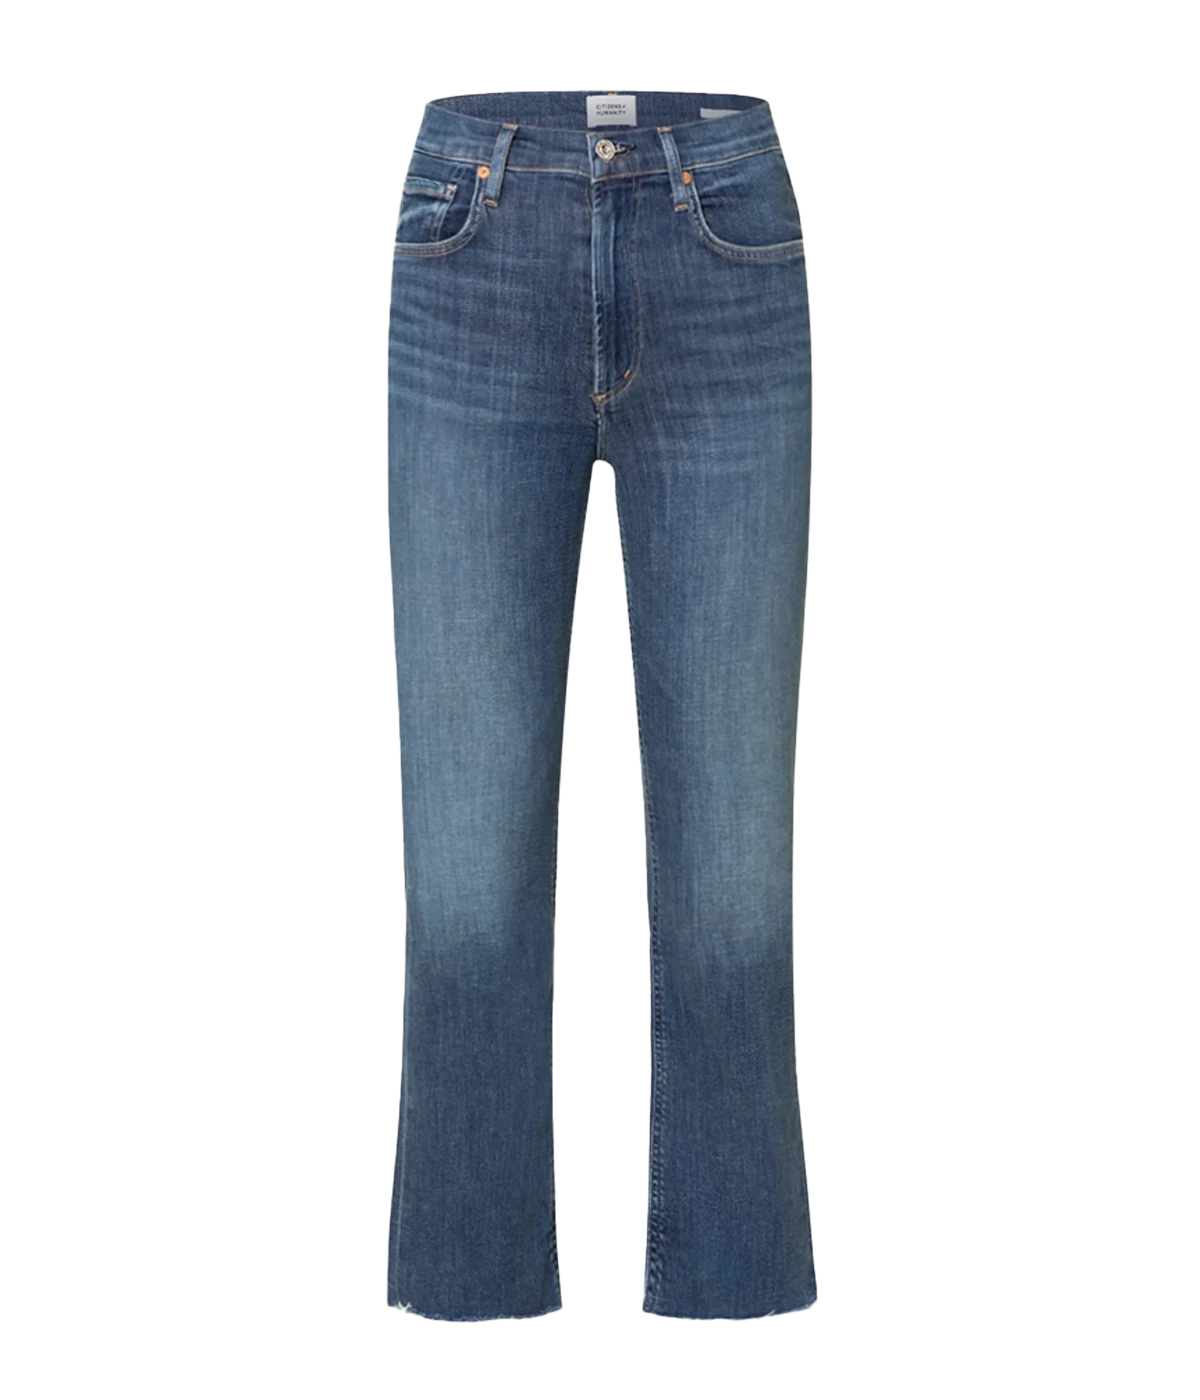 Isola Straight Crop Jean in Lawless